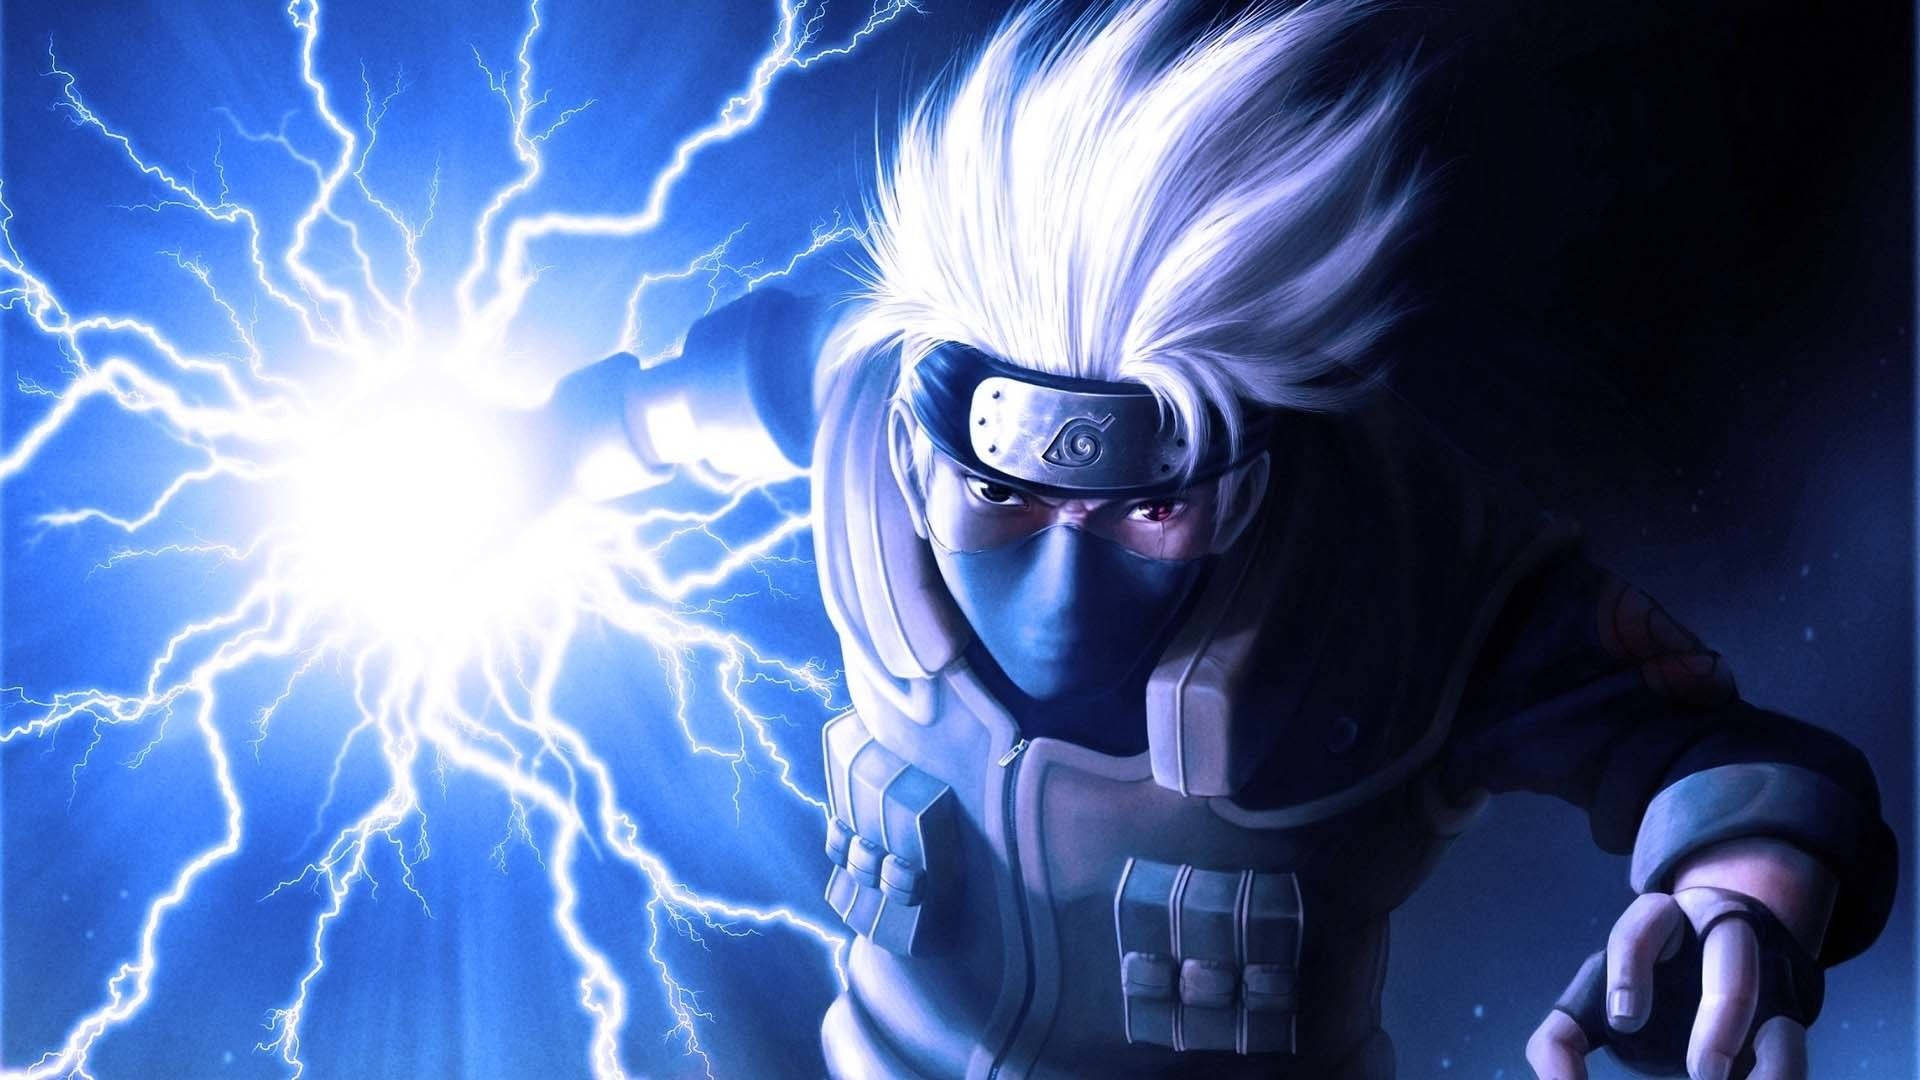 100+] Naruto Anime Background s | Wallpapers.com